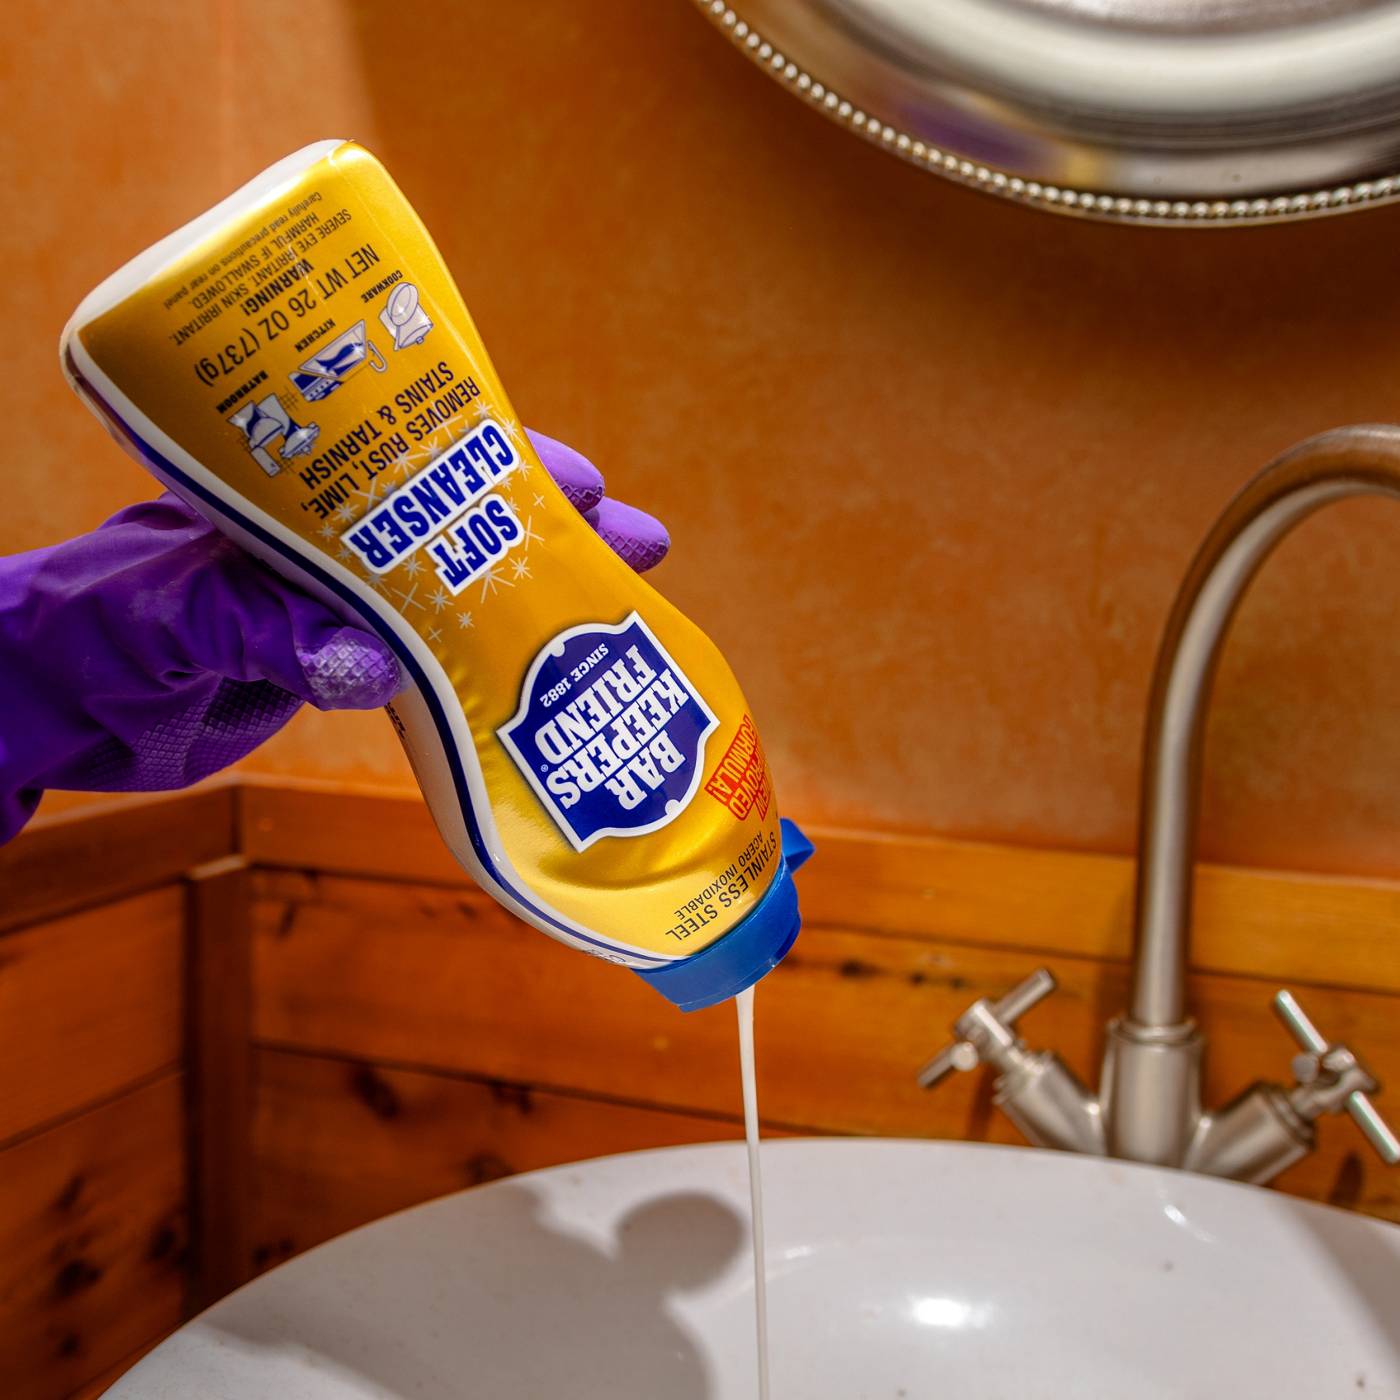 Bar Keepers Friend Soft Cleanser - Shop All Purpose Cleaners at H-E-B